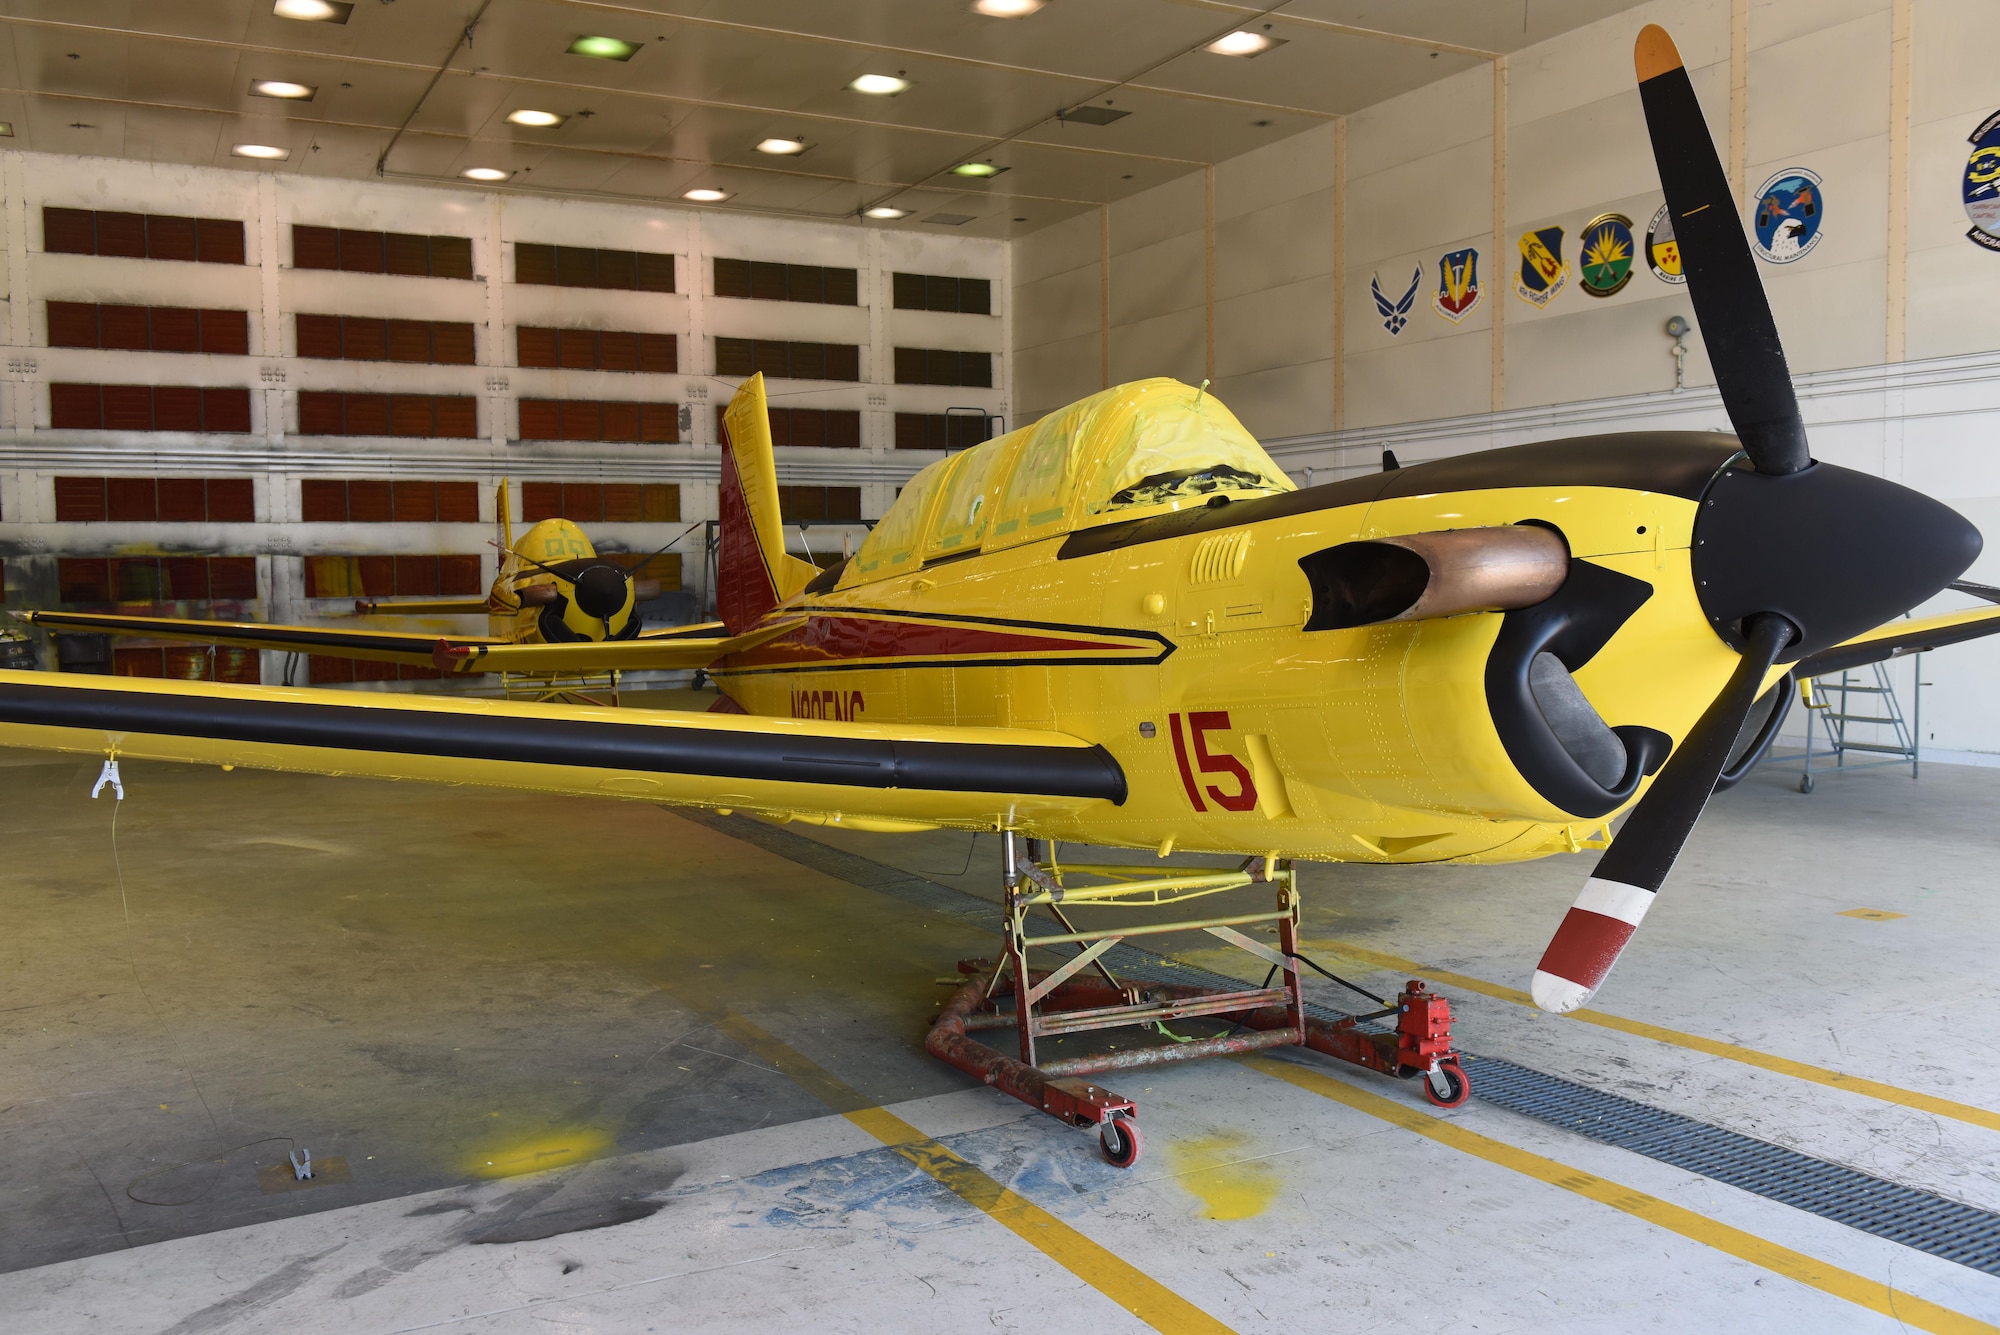 Freshly painted North Carolina Forest Service aviation division T-34C Turbo Mentors sit in the 4th Equipment Maintenance Squadron corrosion control shop, April 21, 2017, at Seymour Johnson Air Force Base, North Carolina. The two turbine powered T-34Cs replaced the piston powered T-34B Mentor lead aircraft previously used by the NCFS. (U.S. Air Force photo by Airman 1st Class Ashley Williamson)